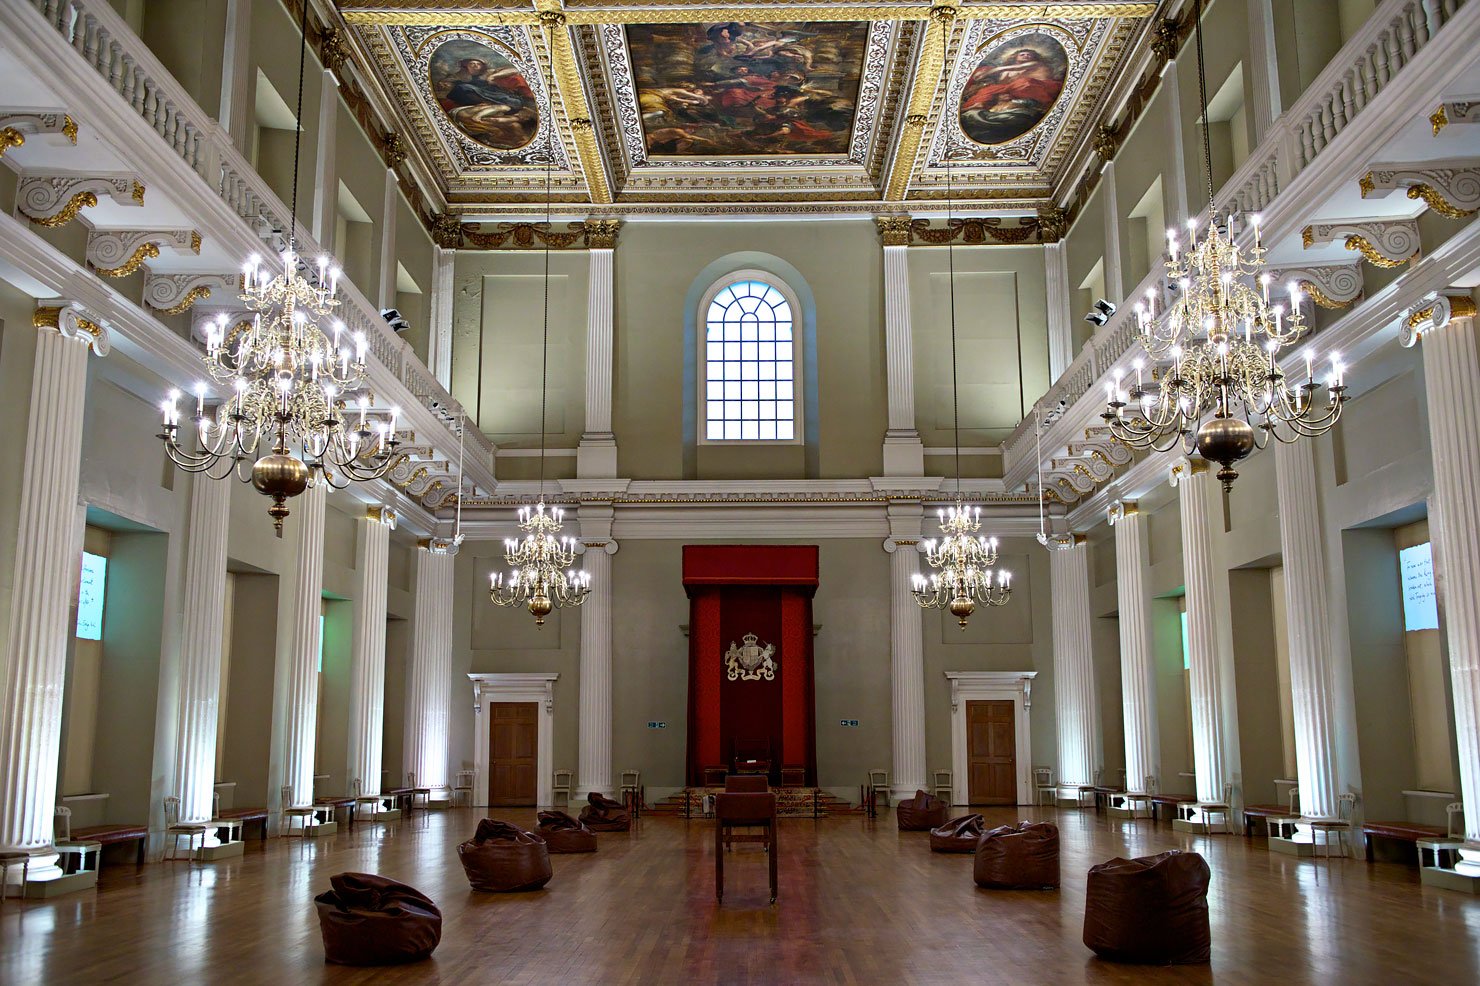 Banqueting House - Banqueting Hall with the famous ceiling painted by Rubens in London